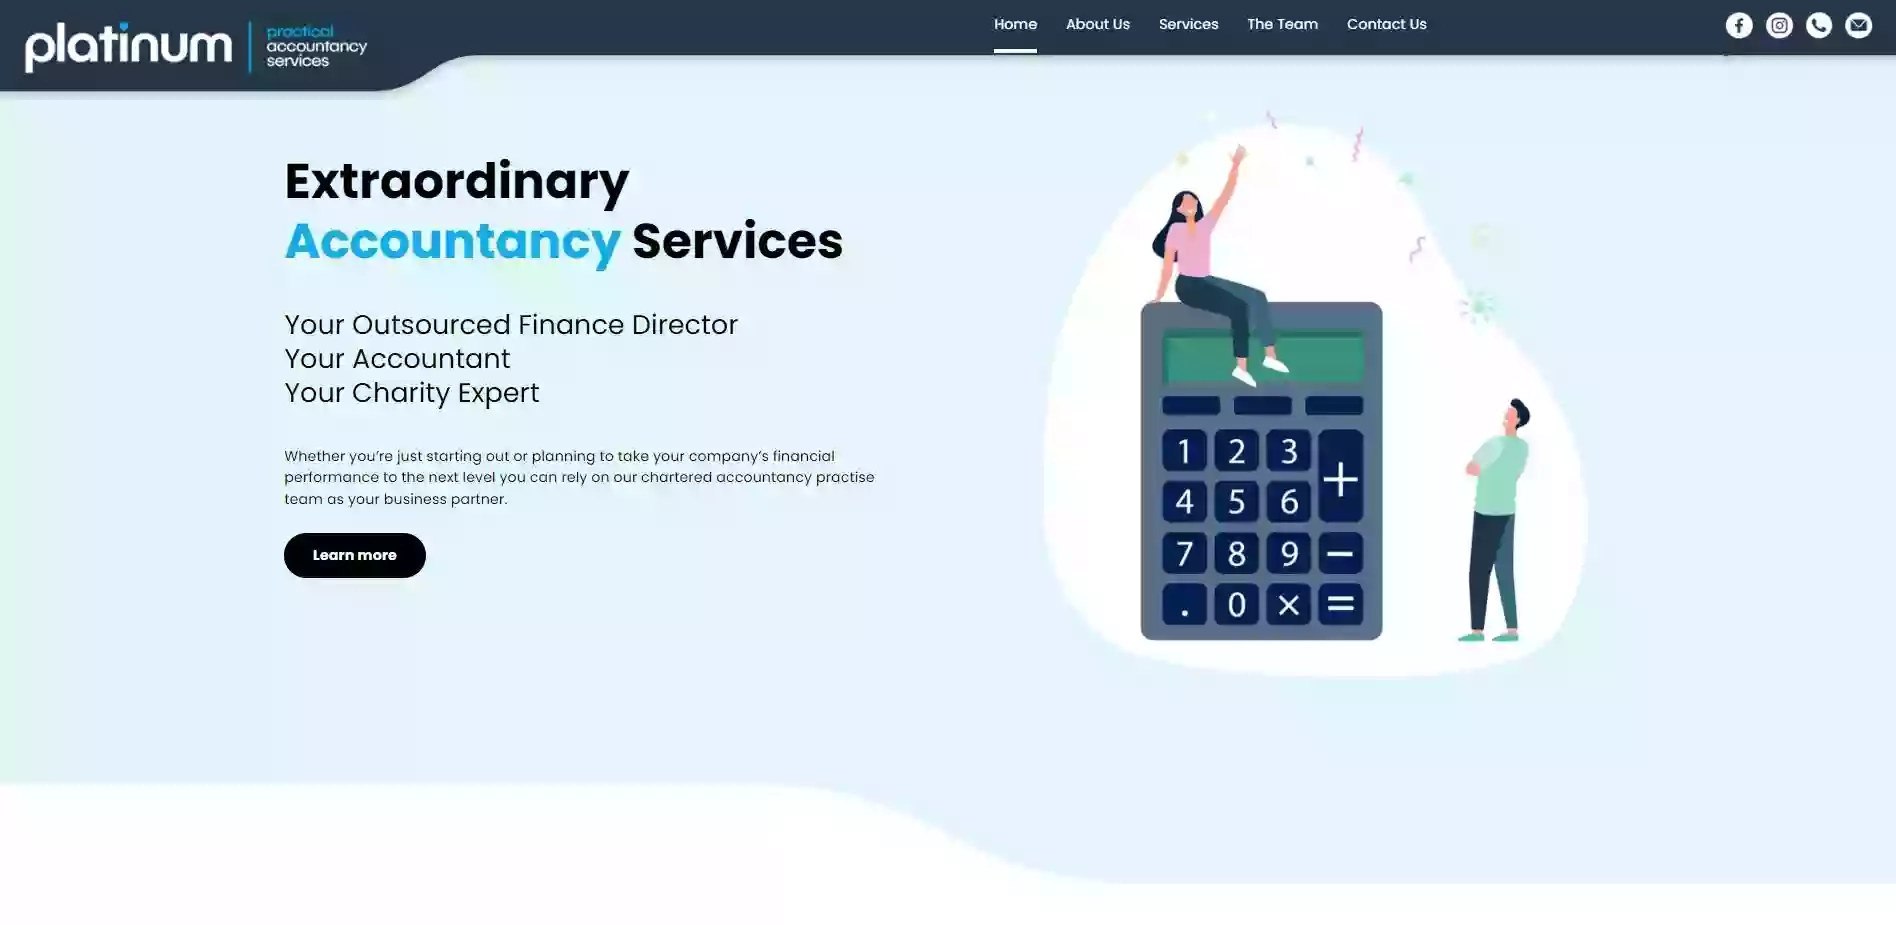 Platinum Accountancy Services Limited